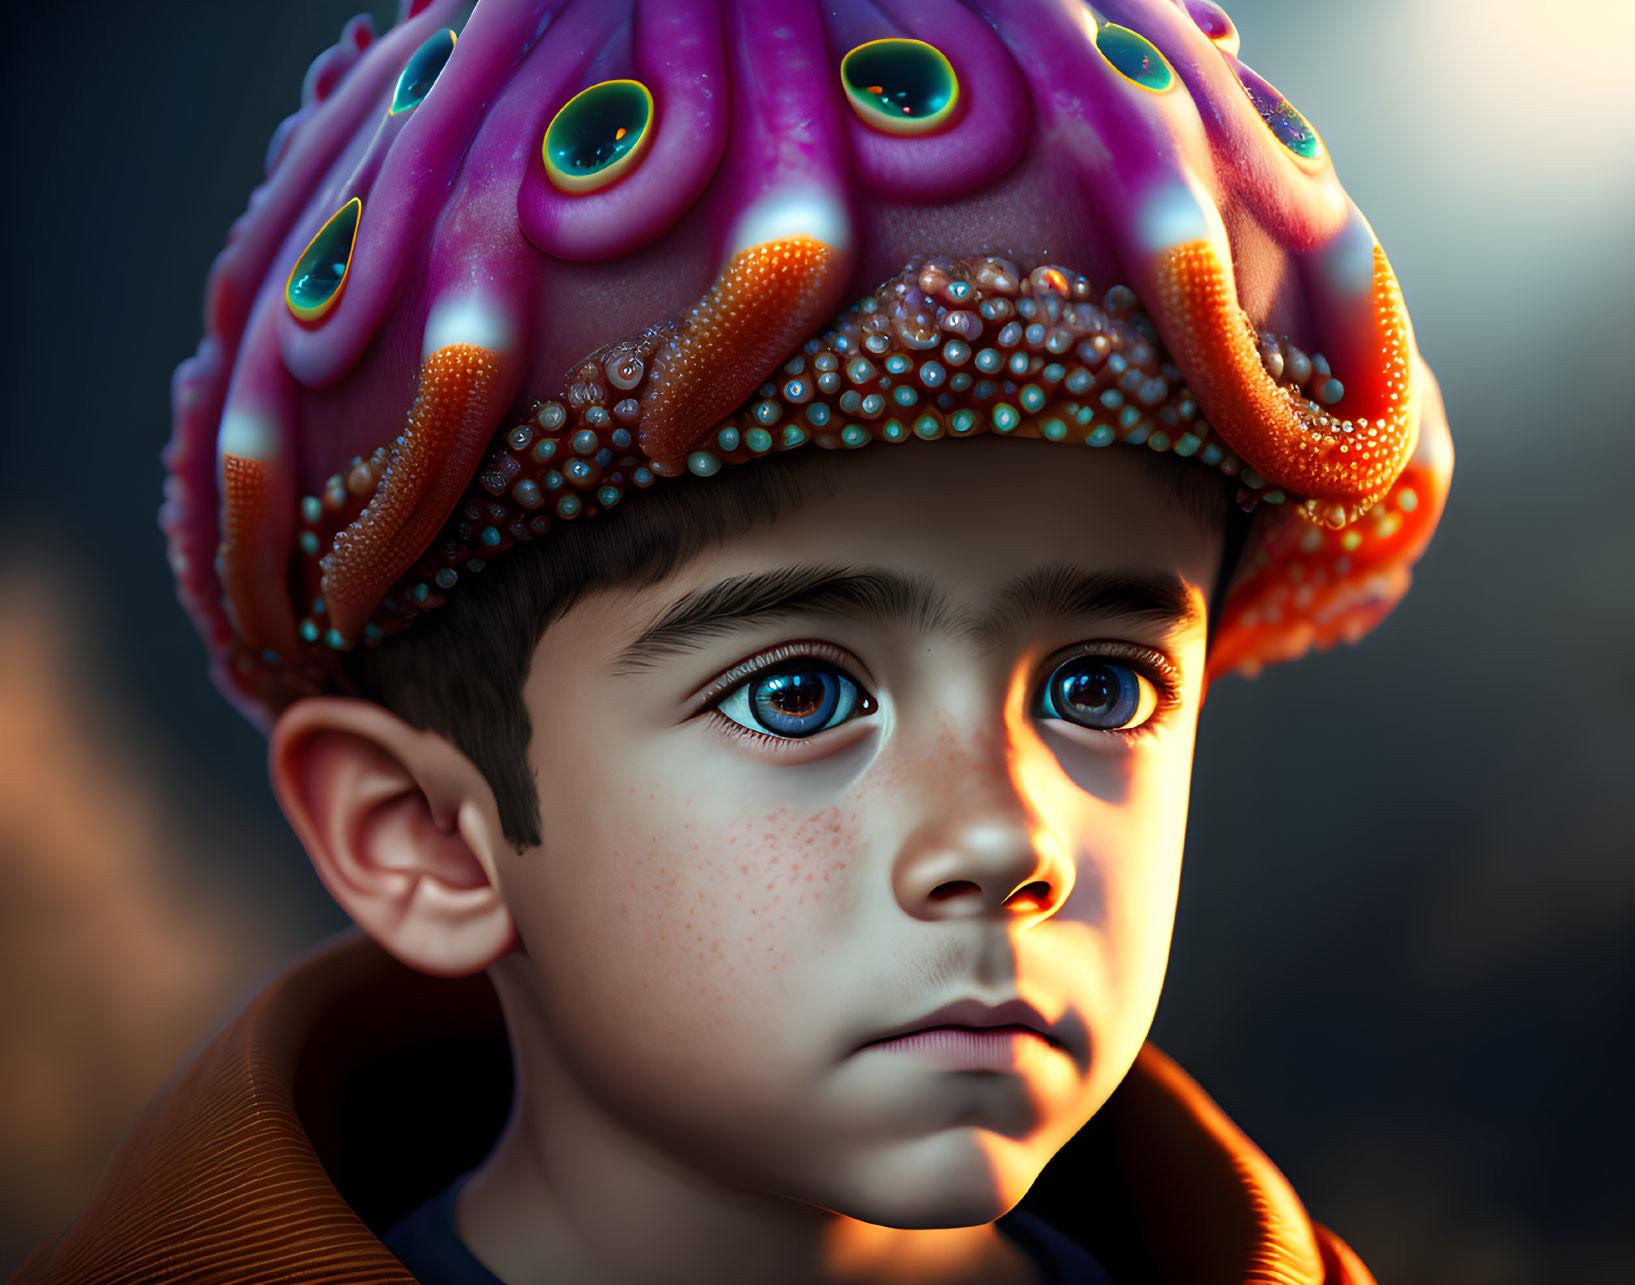 Child with expressive eyes in octopus helmet with tentacles